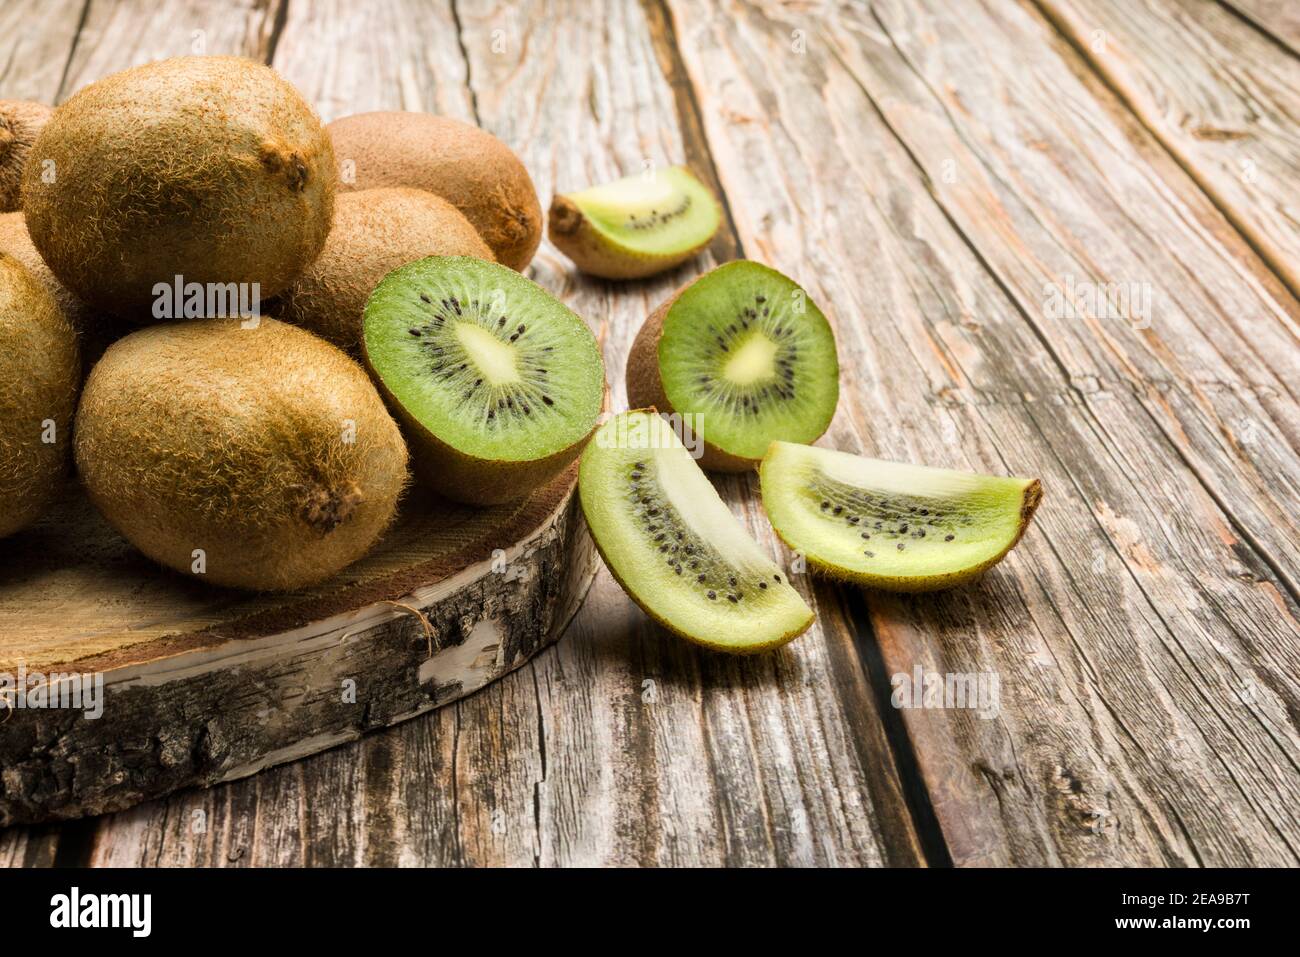 kiwi fruits with slices on wooden table Stock Photo